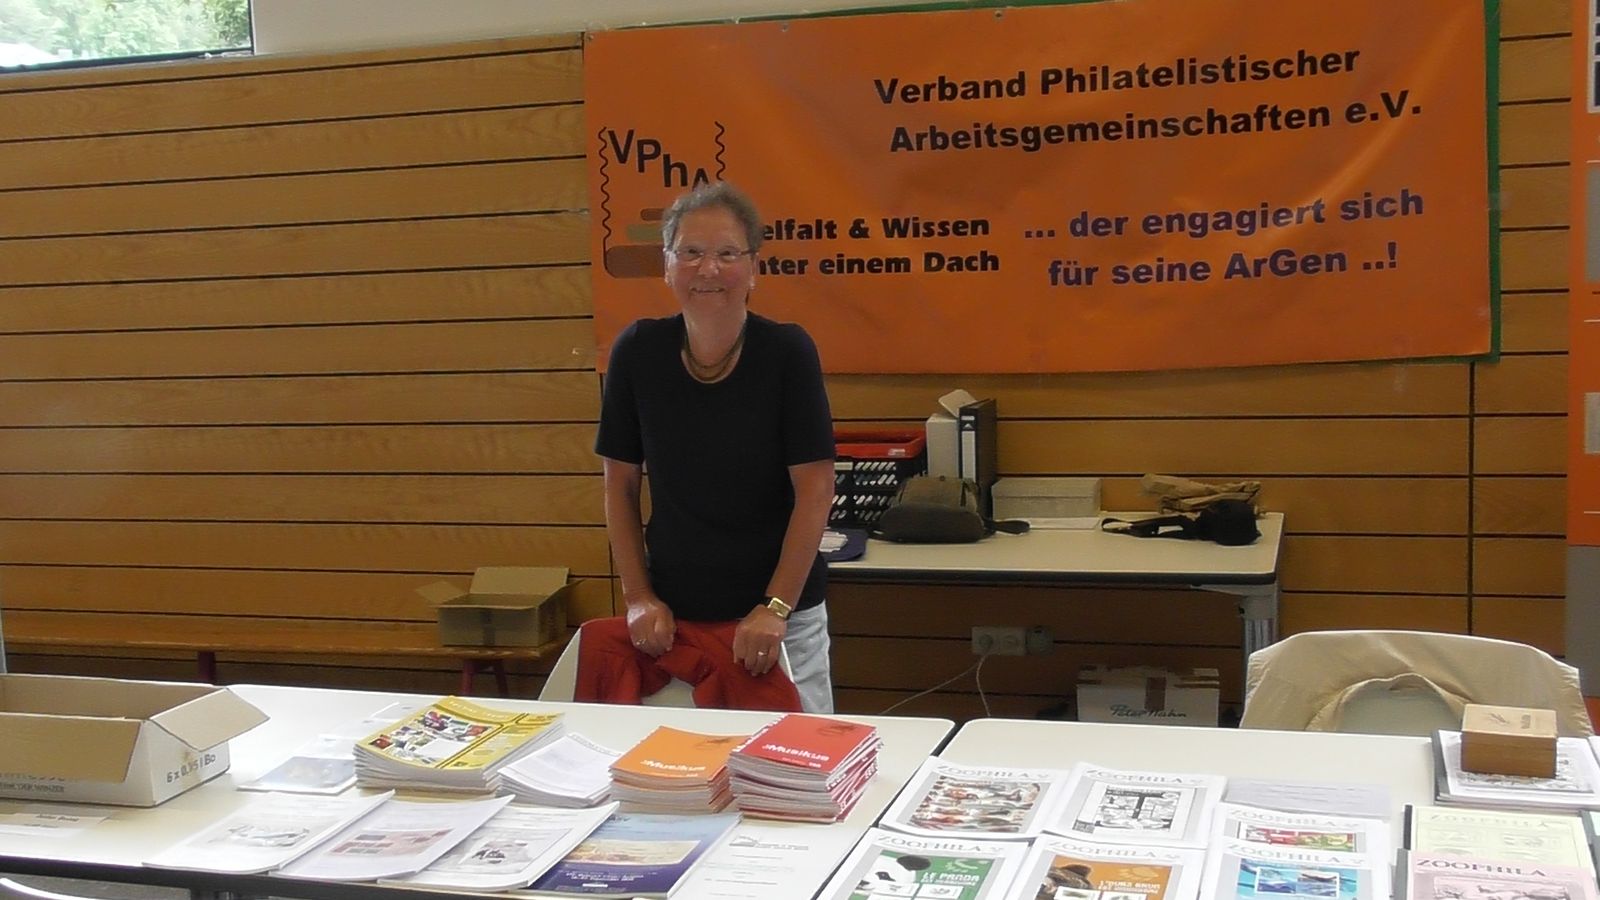 vpha-stand_04